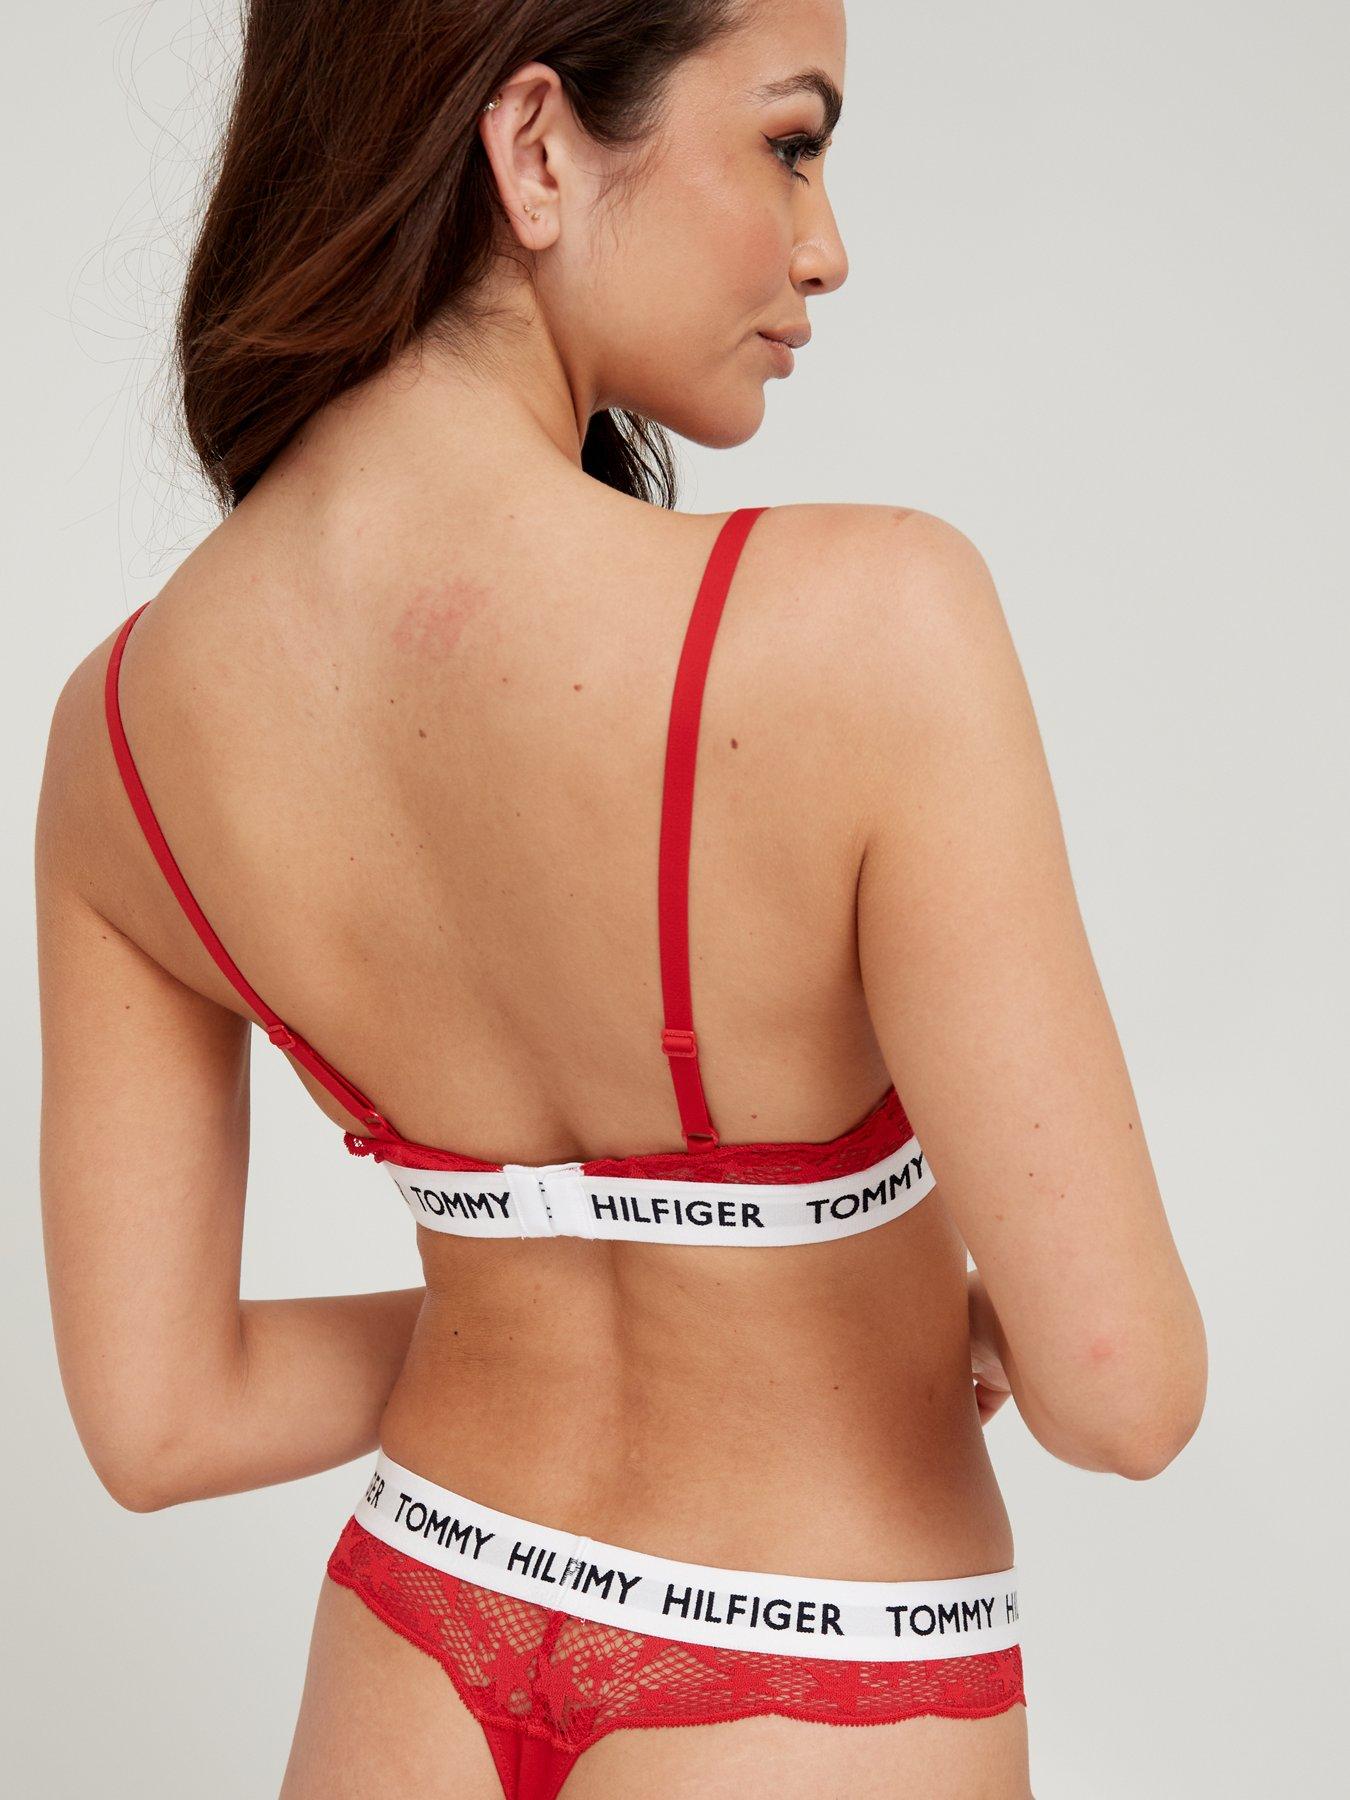 Tommy Hilfiger 85 Star Lace Triangle Bra - Red